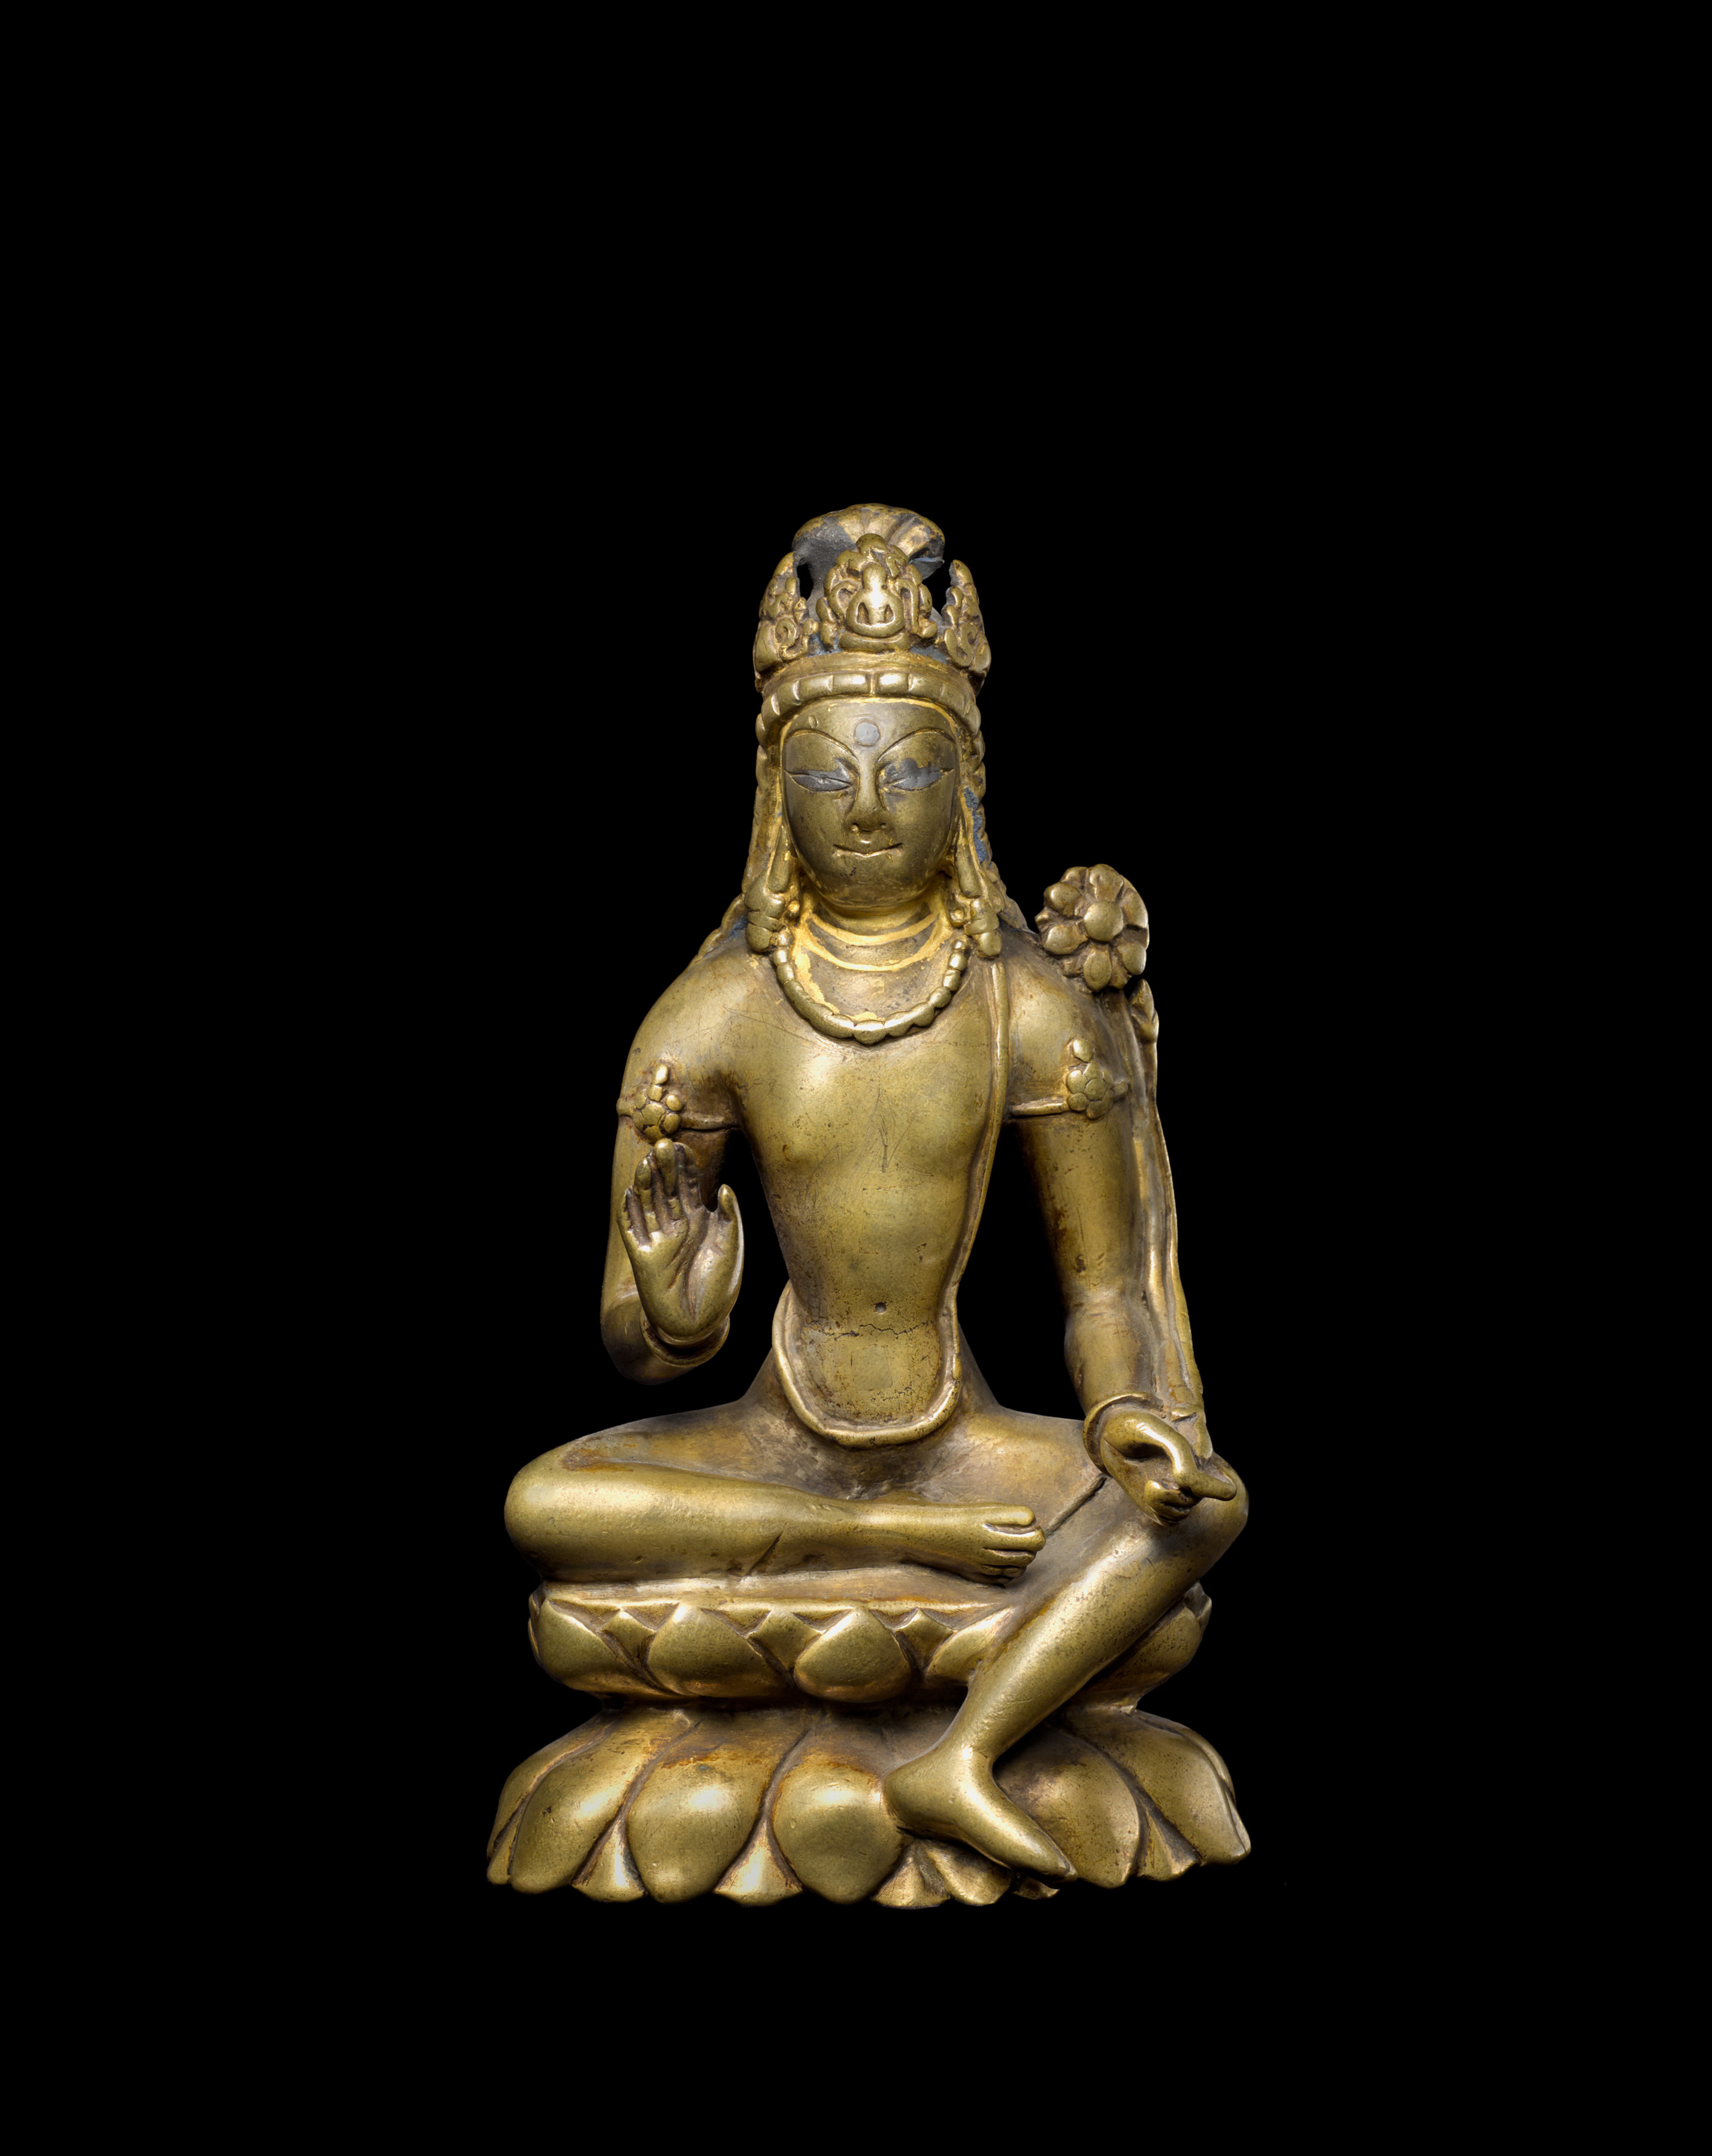 This elegant sculpture depicts Avalokiteshvara Padmapani seated at ease with his left leg reaching over his pedestal 